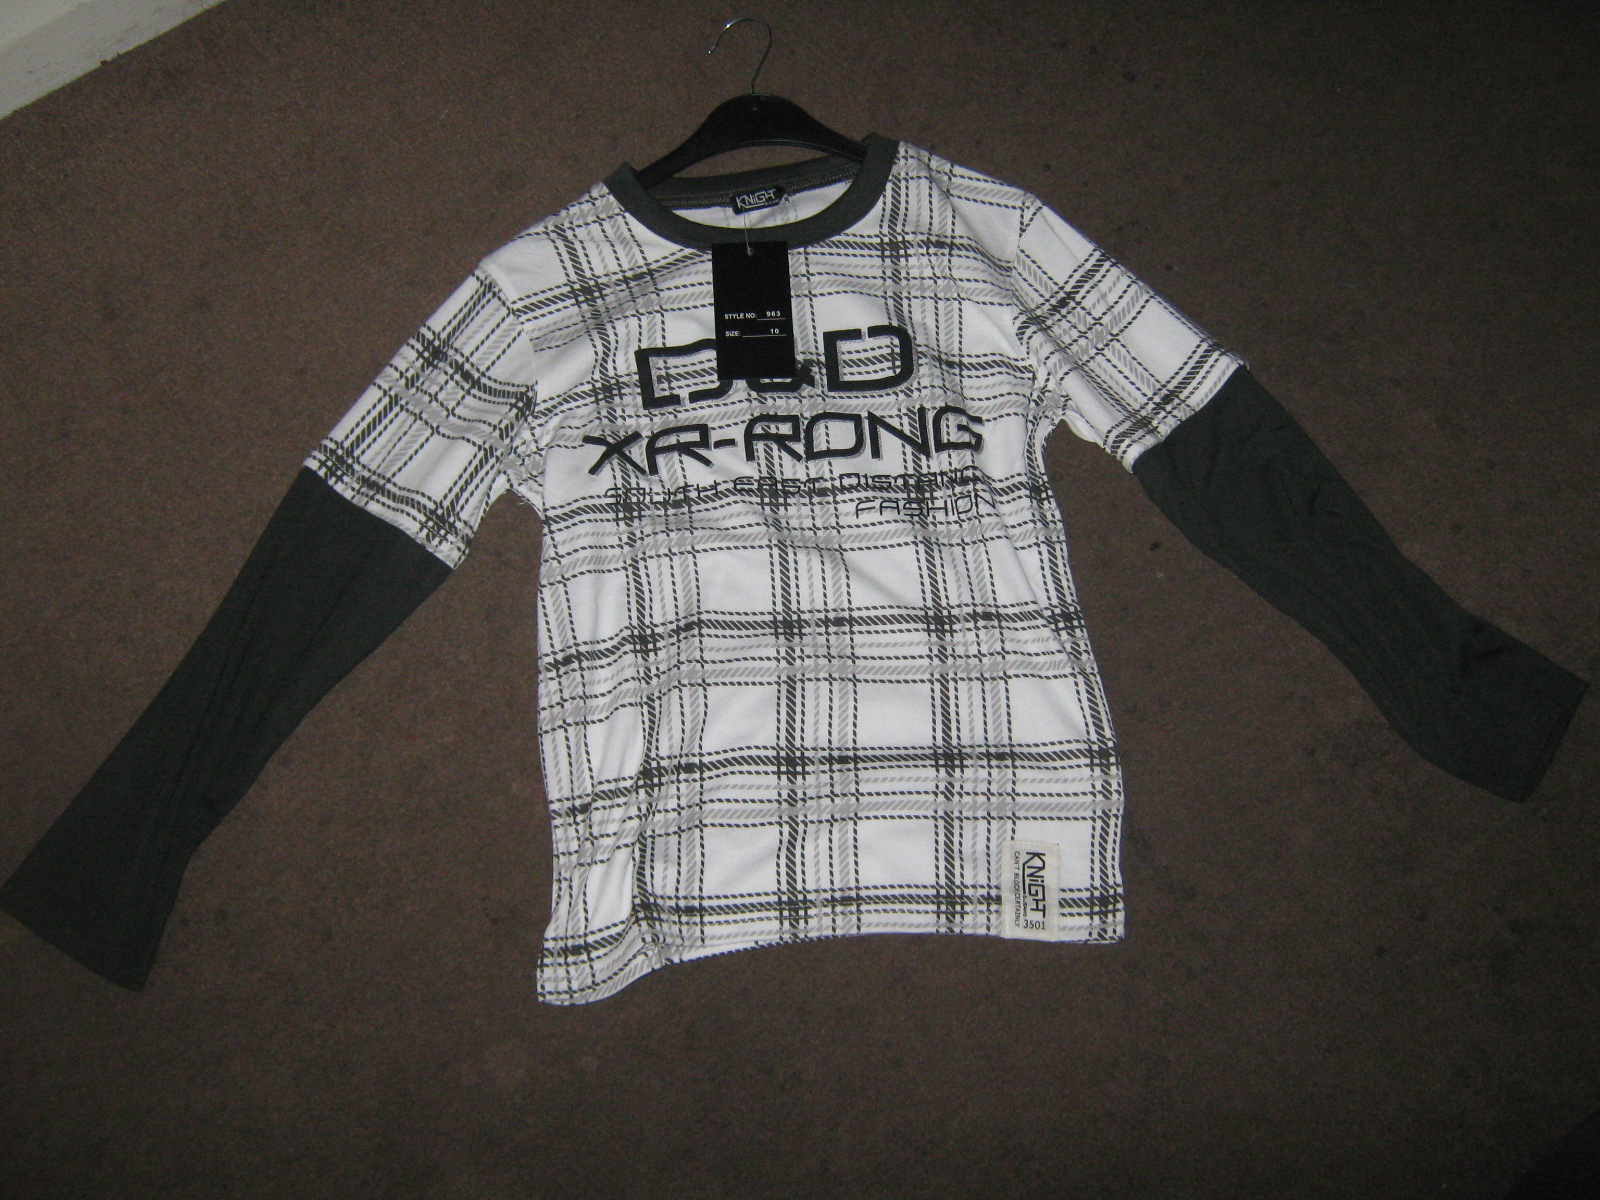 Boys long sleeve tops childrens clothes shop Leicester UK